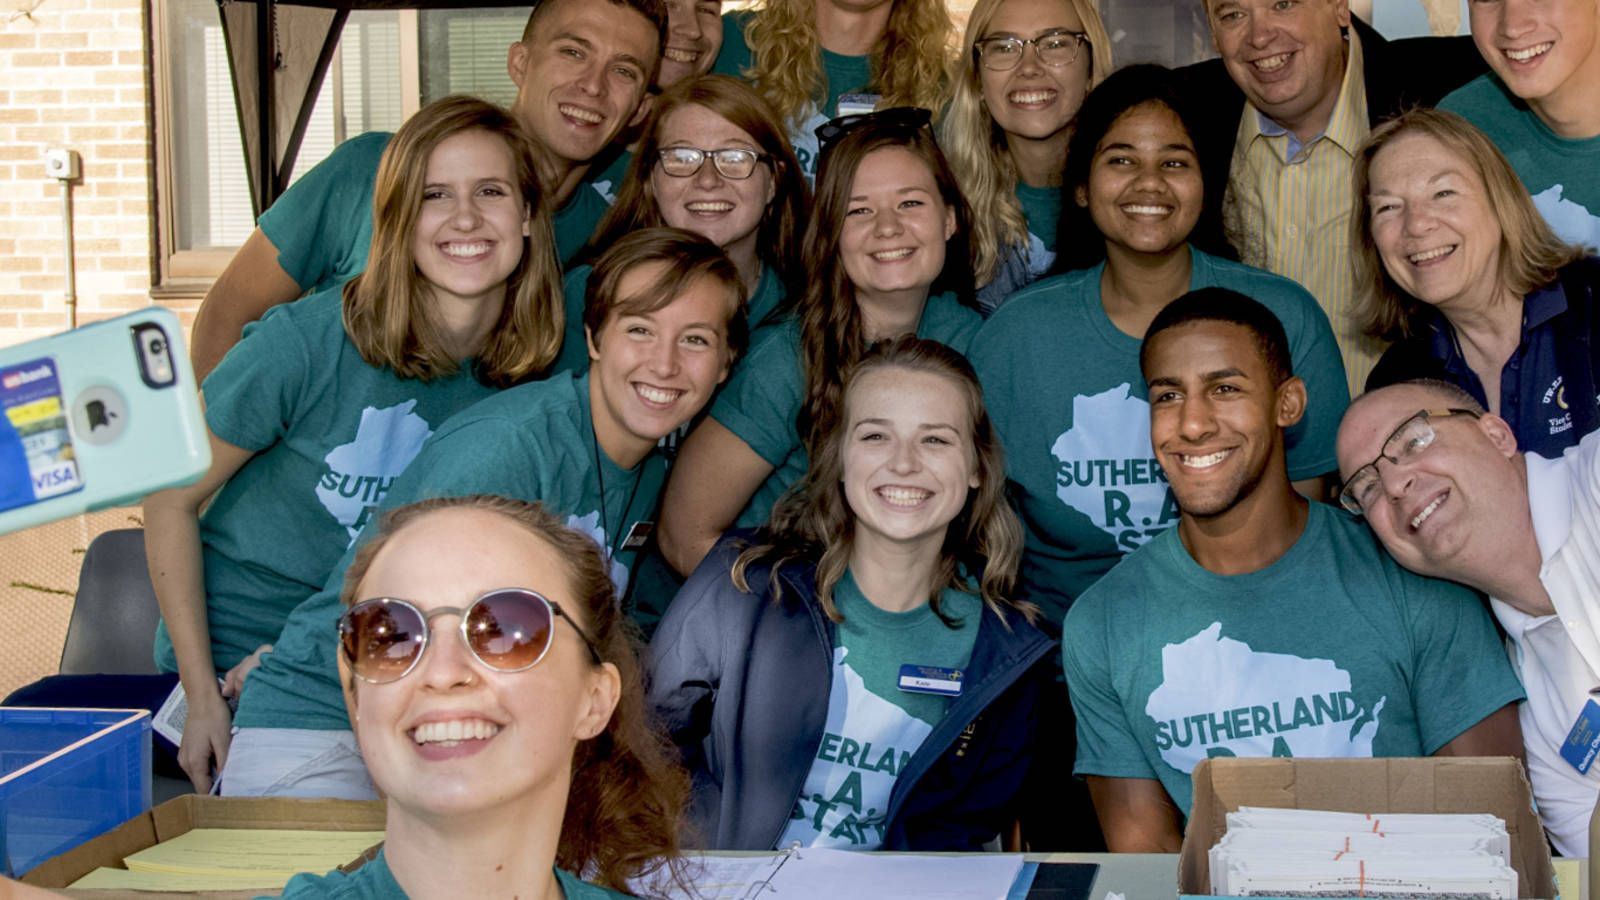 Sutherland Hall Move-In team takes selfie with Chancellor Jim